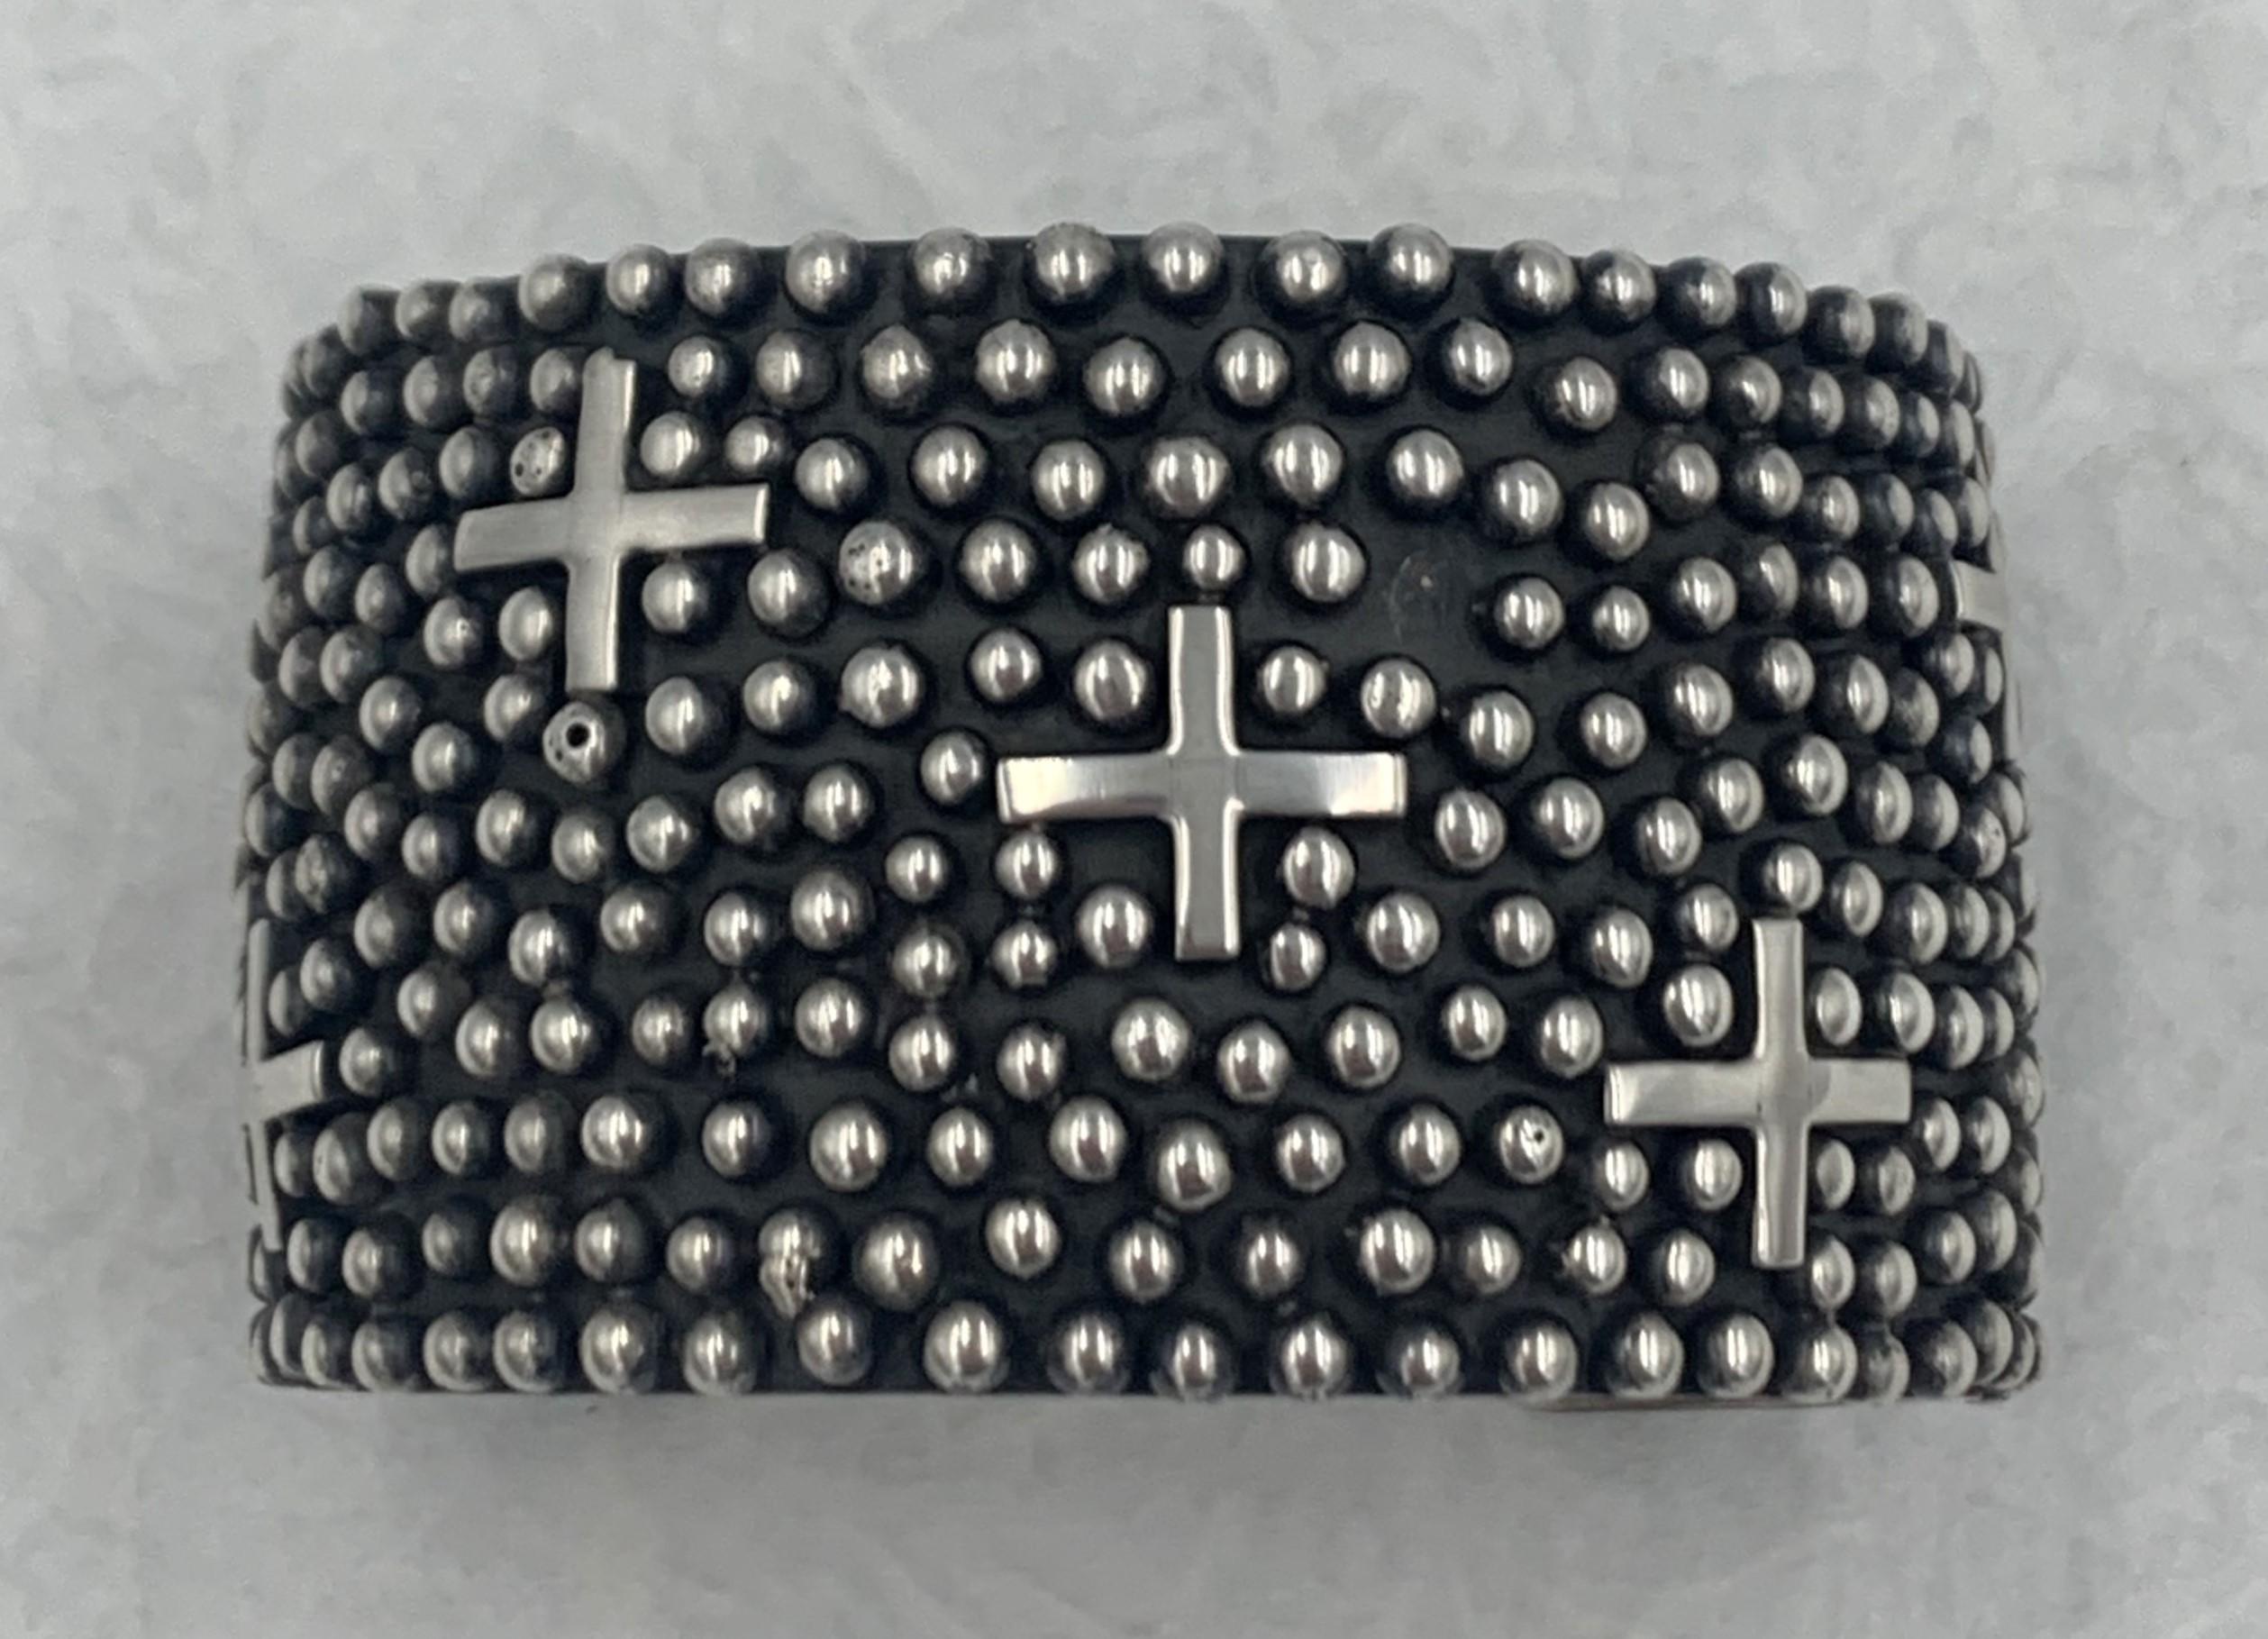 This bracelet is handcrafted by Navajo silversmith Ronnie Ray Willie. This piece features that design with sterling silver crosses resting within the beads (raindrops). *one drop on the cuff is missing

The size, inside measurements of the cuff is 5